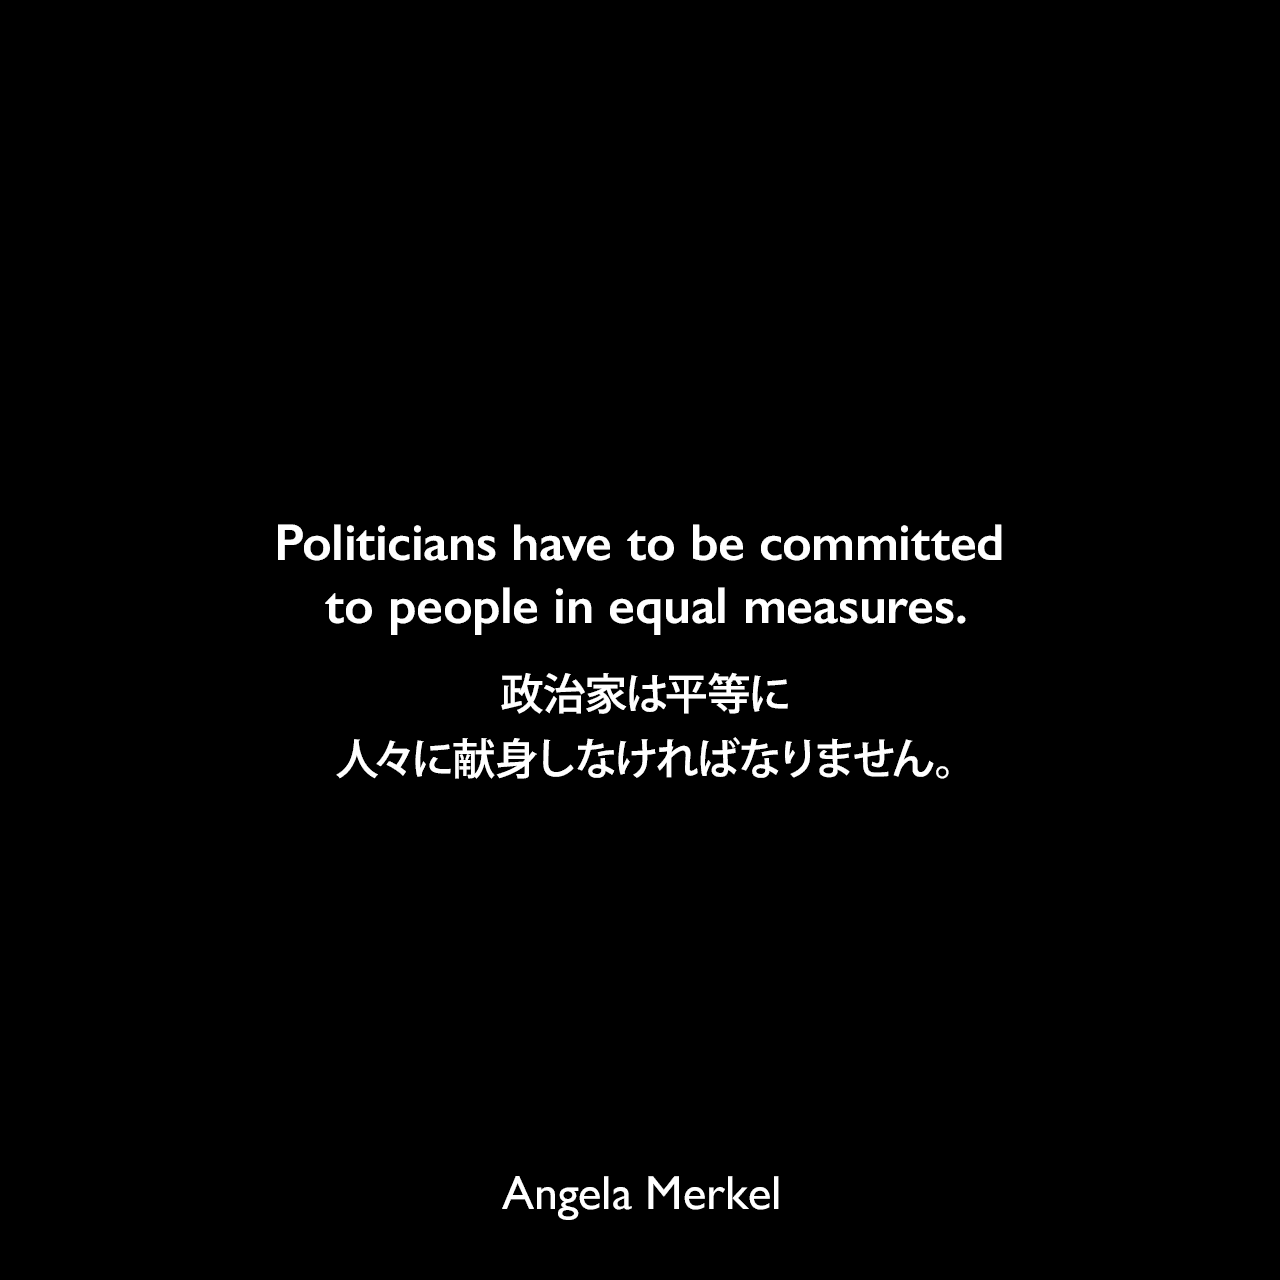 Politicians have to be committed to people in equal measures.政治家は平等に人々に献身しなければなりません。Angela Merkel